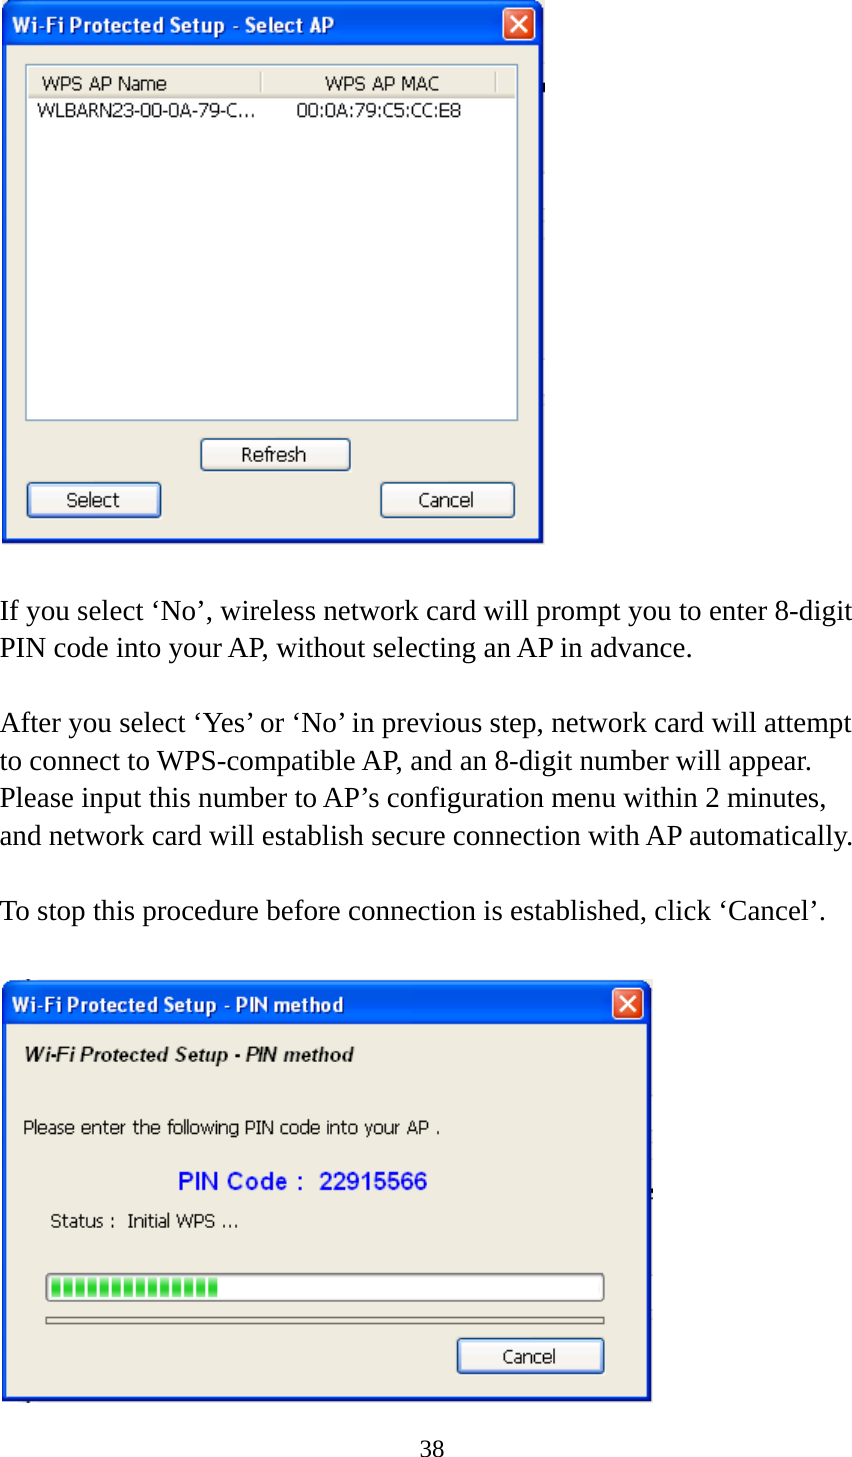 38    If you select ‘No’, wireless network card will prompt you to enter 8-digit PIN code into your AP, without selecting an AP in advance.  After you select ‘Yes’ or ‘No’ in previous step, network card will attempt to connect to WPS-compatible AP, and an 8-digit number will appear. Please input this number to AP’s configuration menu within 2 minutes, and network card will establish secure connection with AP automatically.  To stop this procedure before connection is established, click ‘Cancel’.   